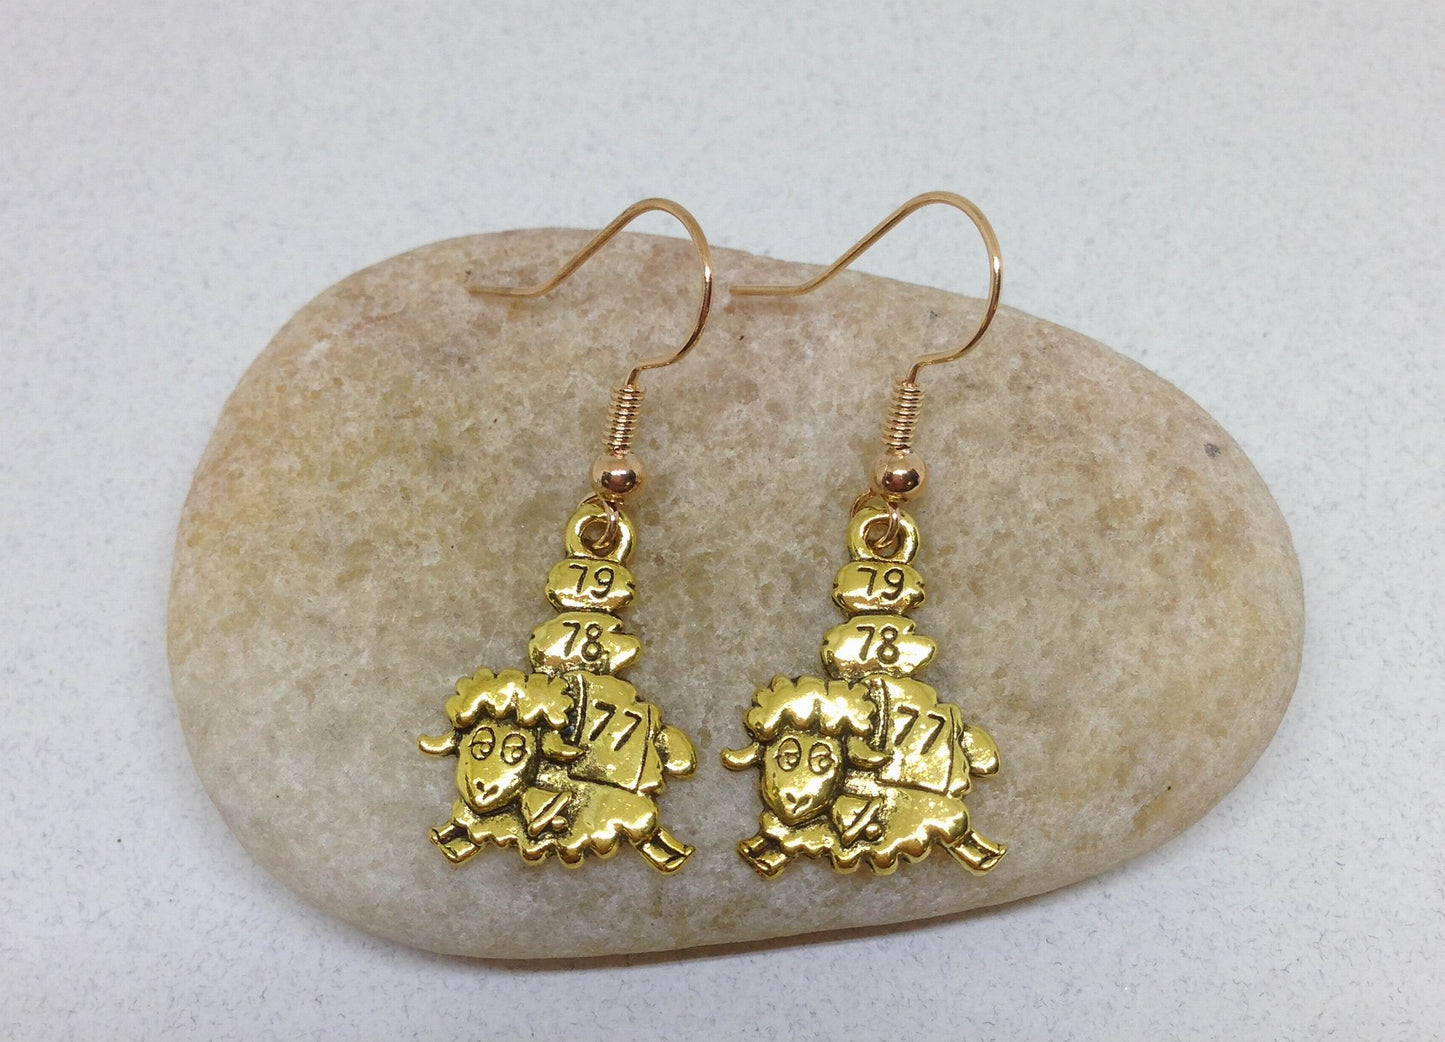 Wholesale Counting Sheep Earrings